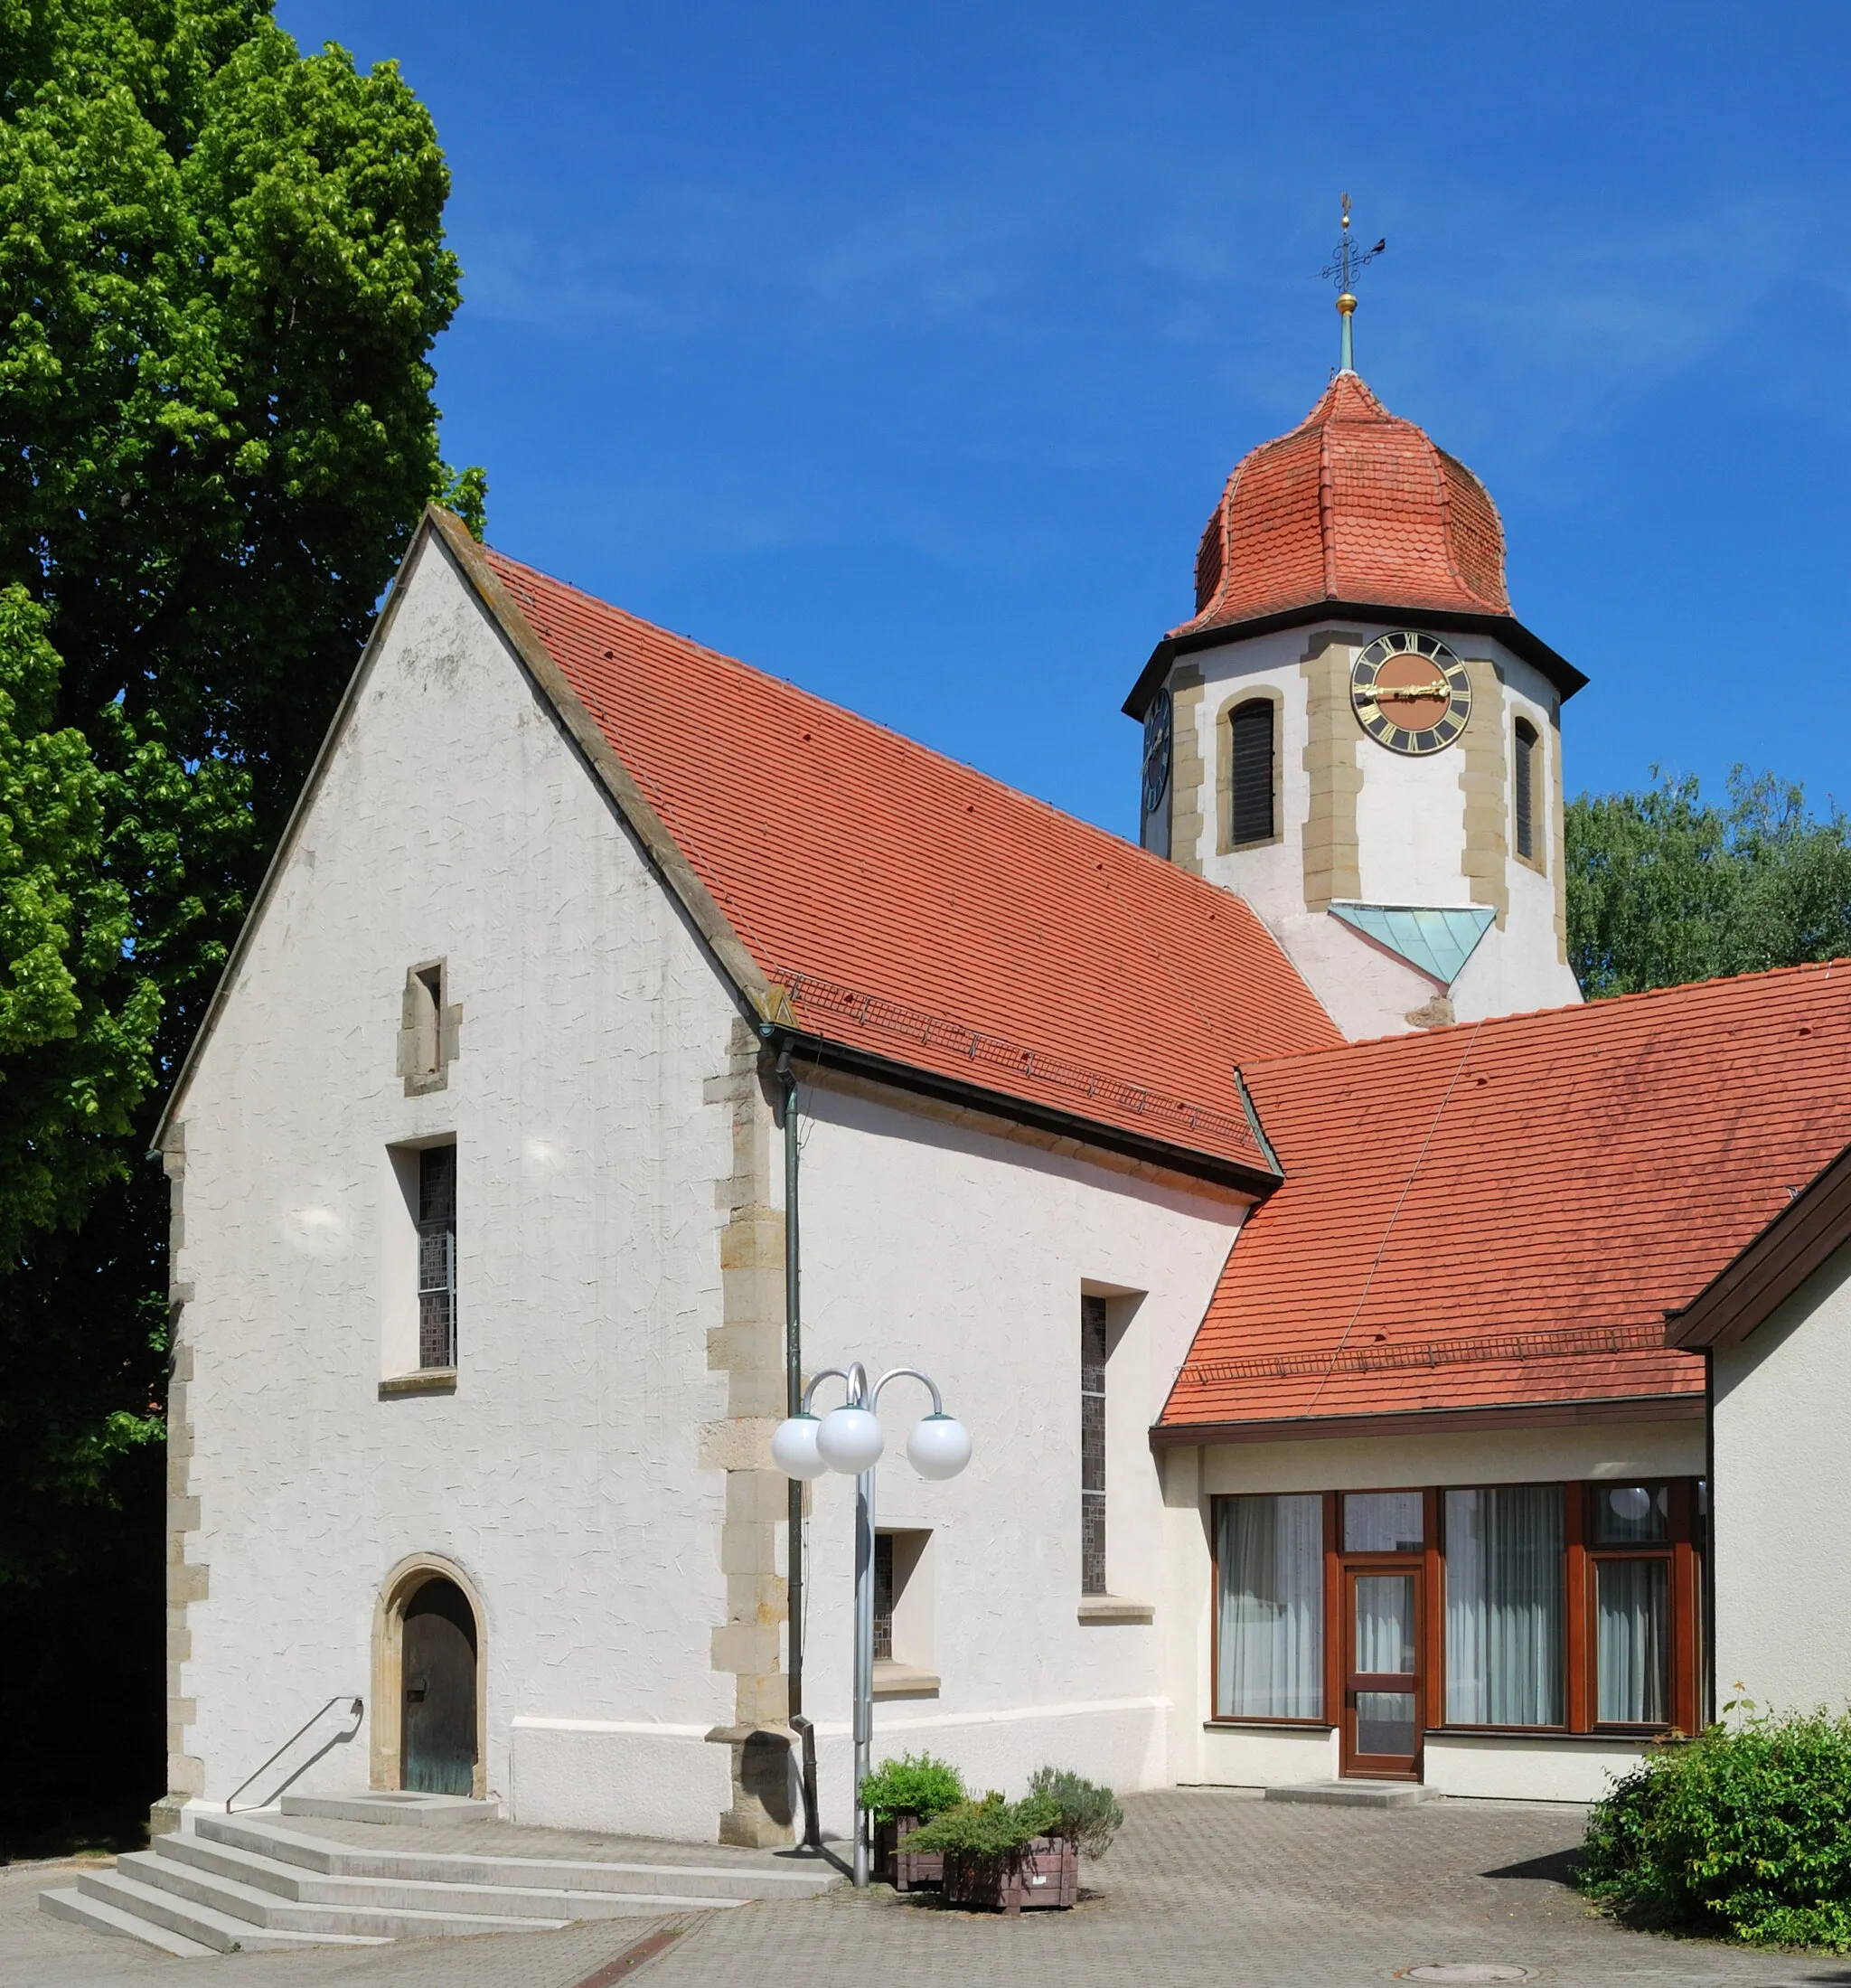 Photo showing: The protestant St. Michael church in Hochdorf an der Enz Germany.